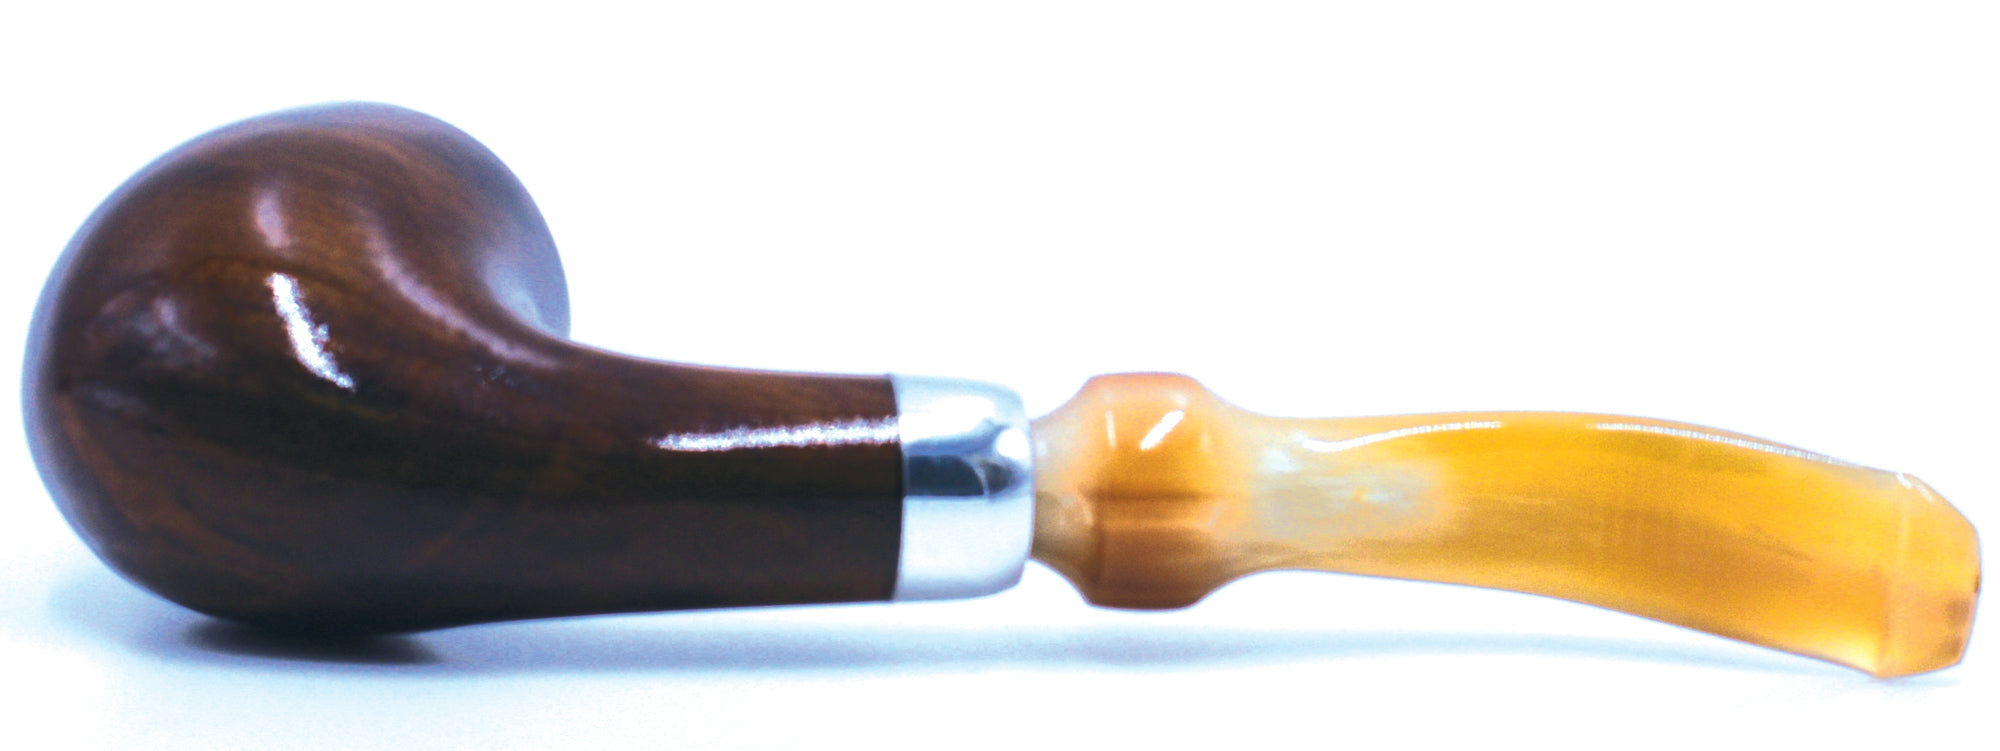 LEGENDEX® LASCALA* Plexiglass Mouthpiece Non-Filtered Briar Smoking Pipe Made In Italy 01-08-715